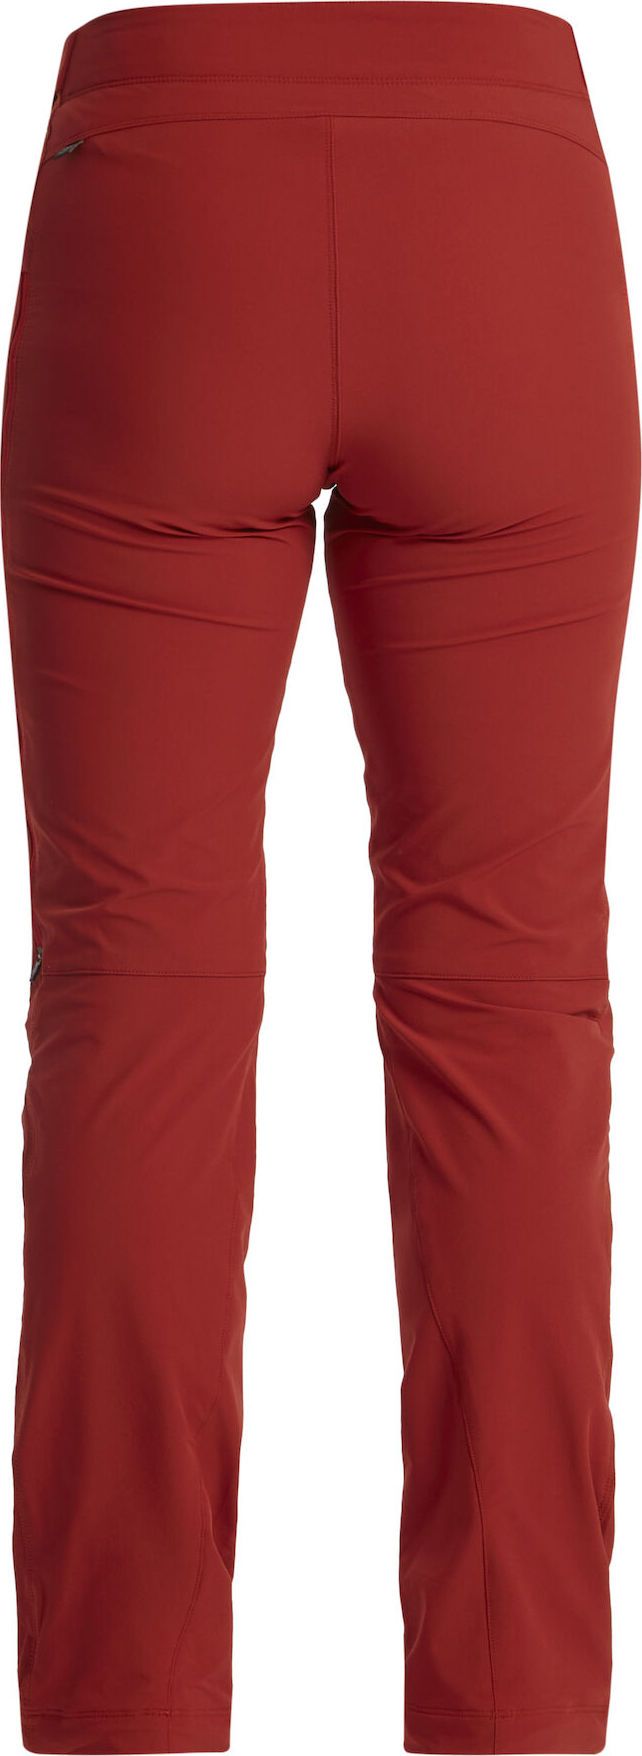 Lundhags Women's Askro Pant Mellow Red Lundhags